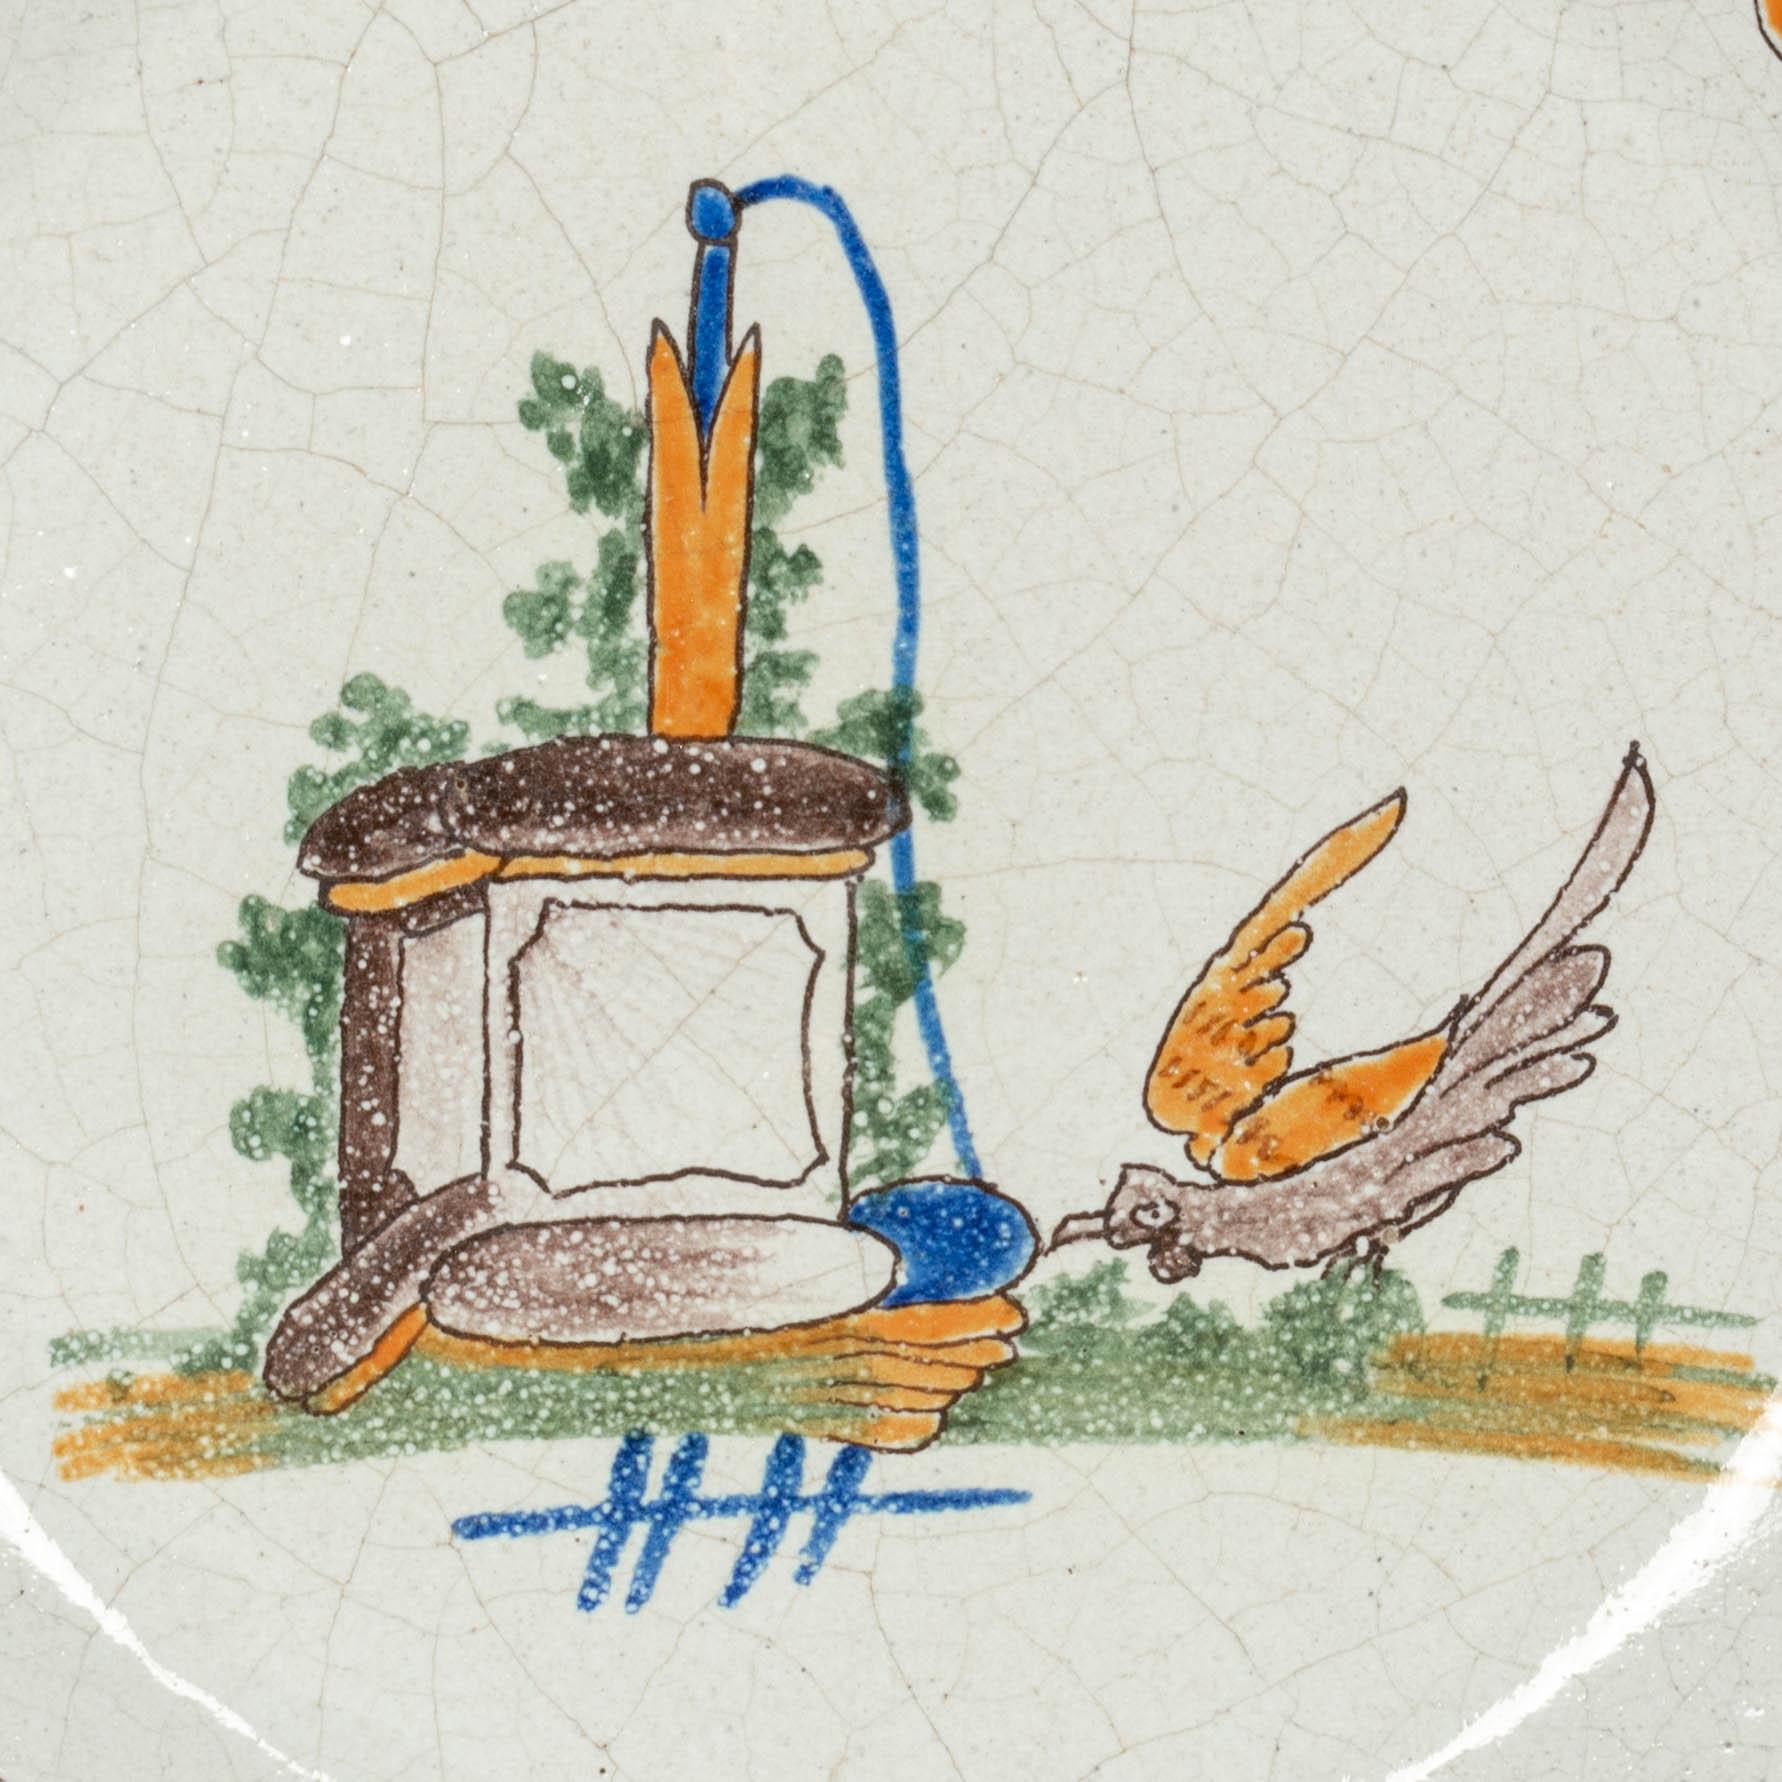 A late 19th century French Malicorne faience pate, hand painted with central image of a well and bird and rim decorated with flowers. Nice quality, thick plate. In good condition with craquelure and small losses to glaze. Pouplard-Beatrix mark on